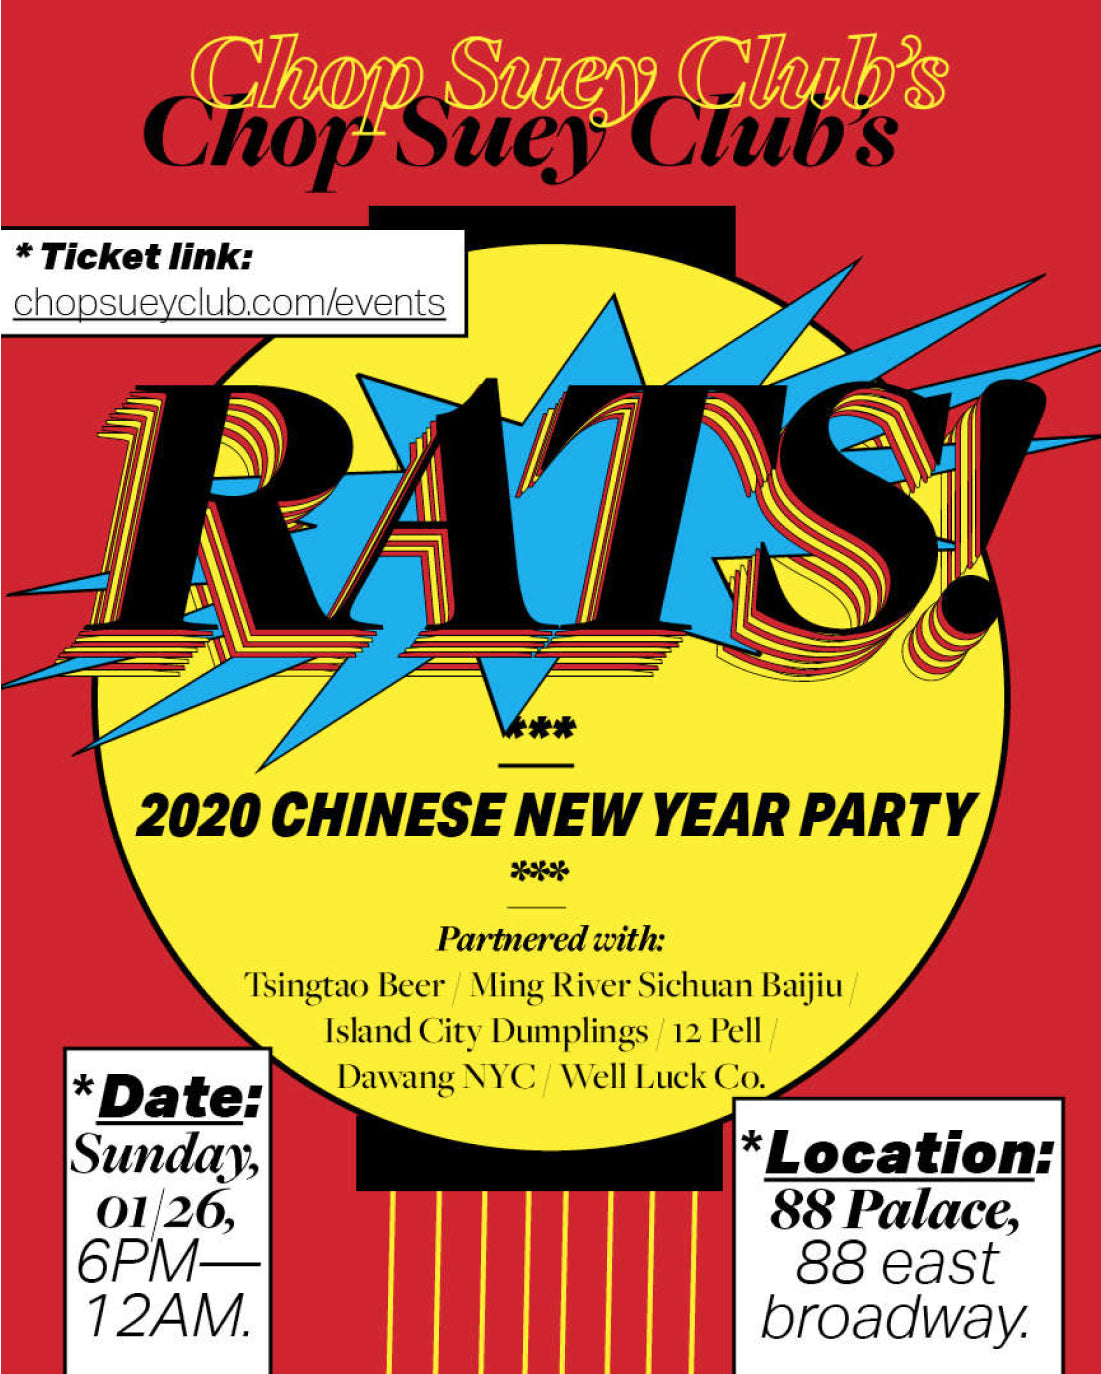 RATS! 2020 CHINESE NEW YEAR PARTY